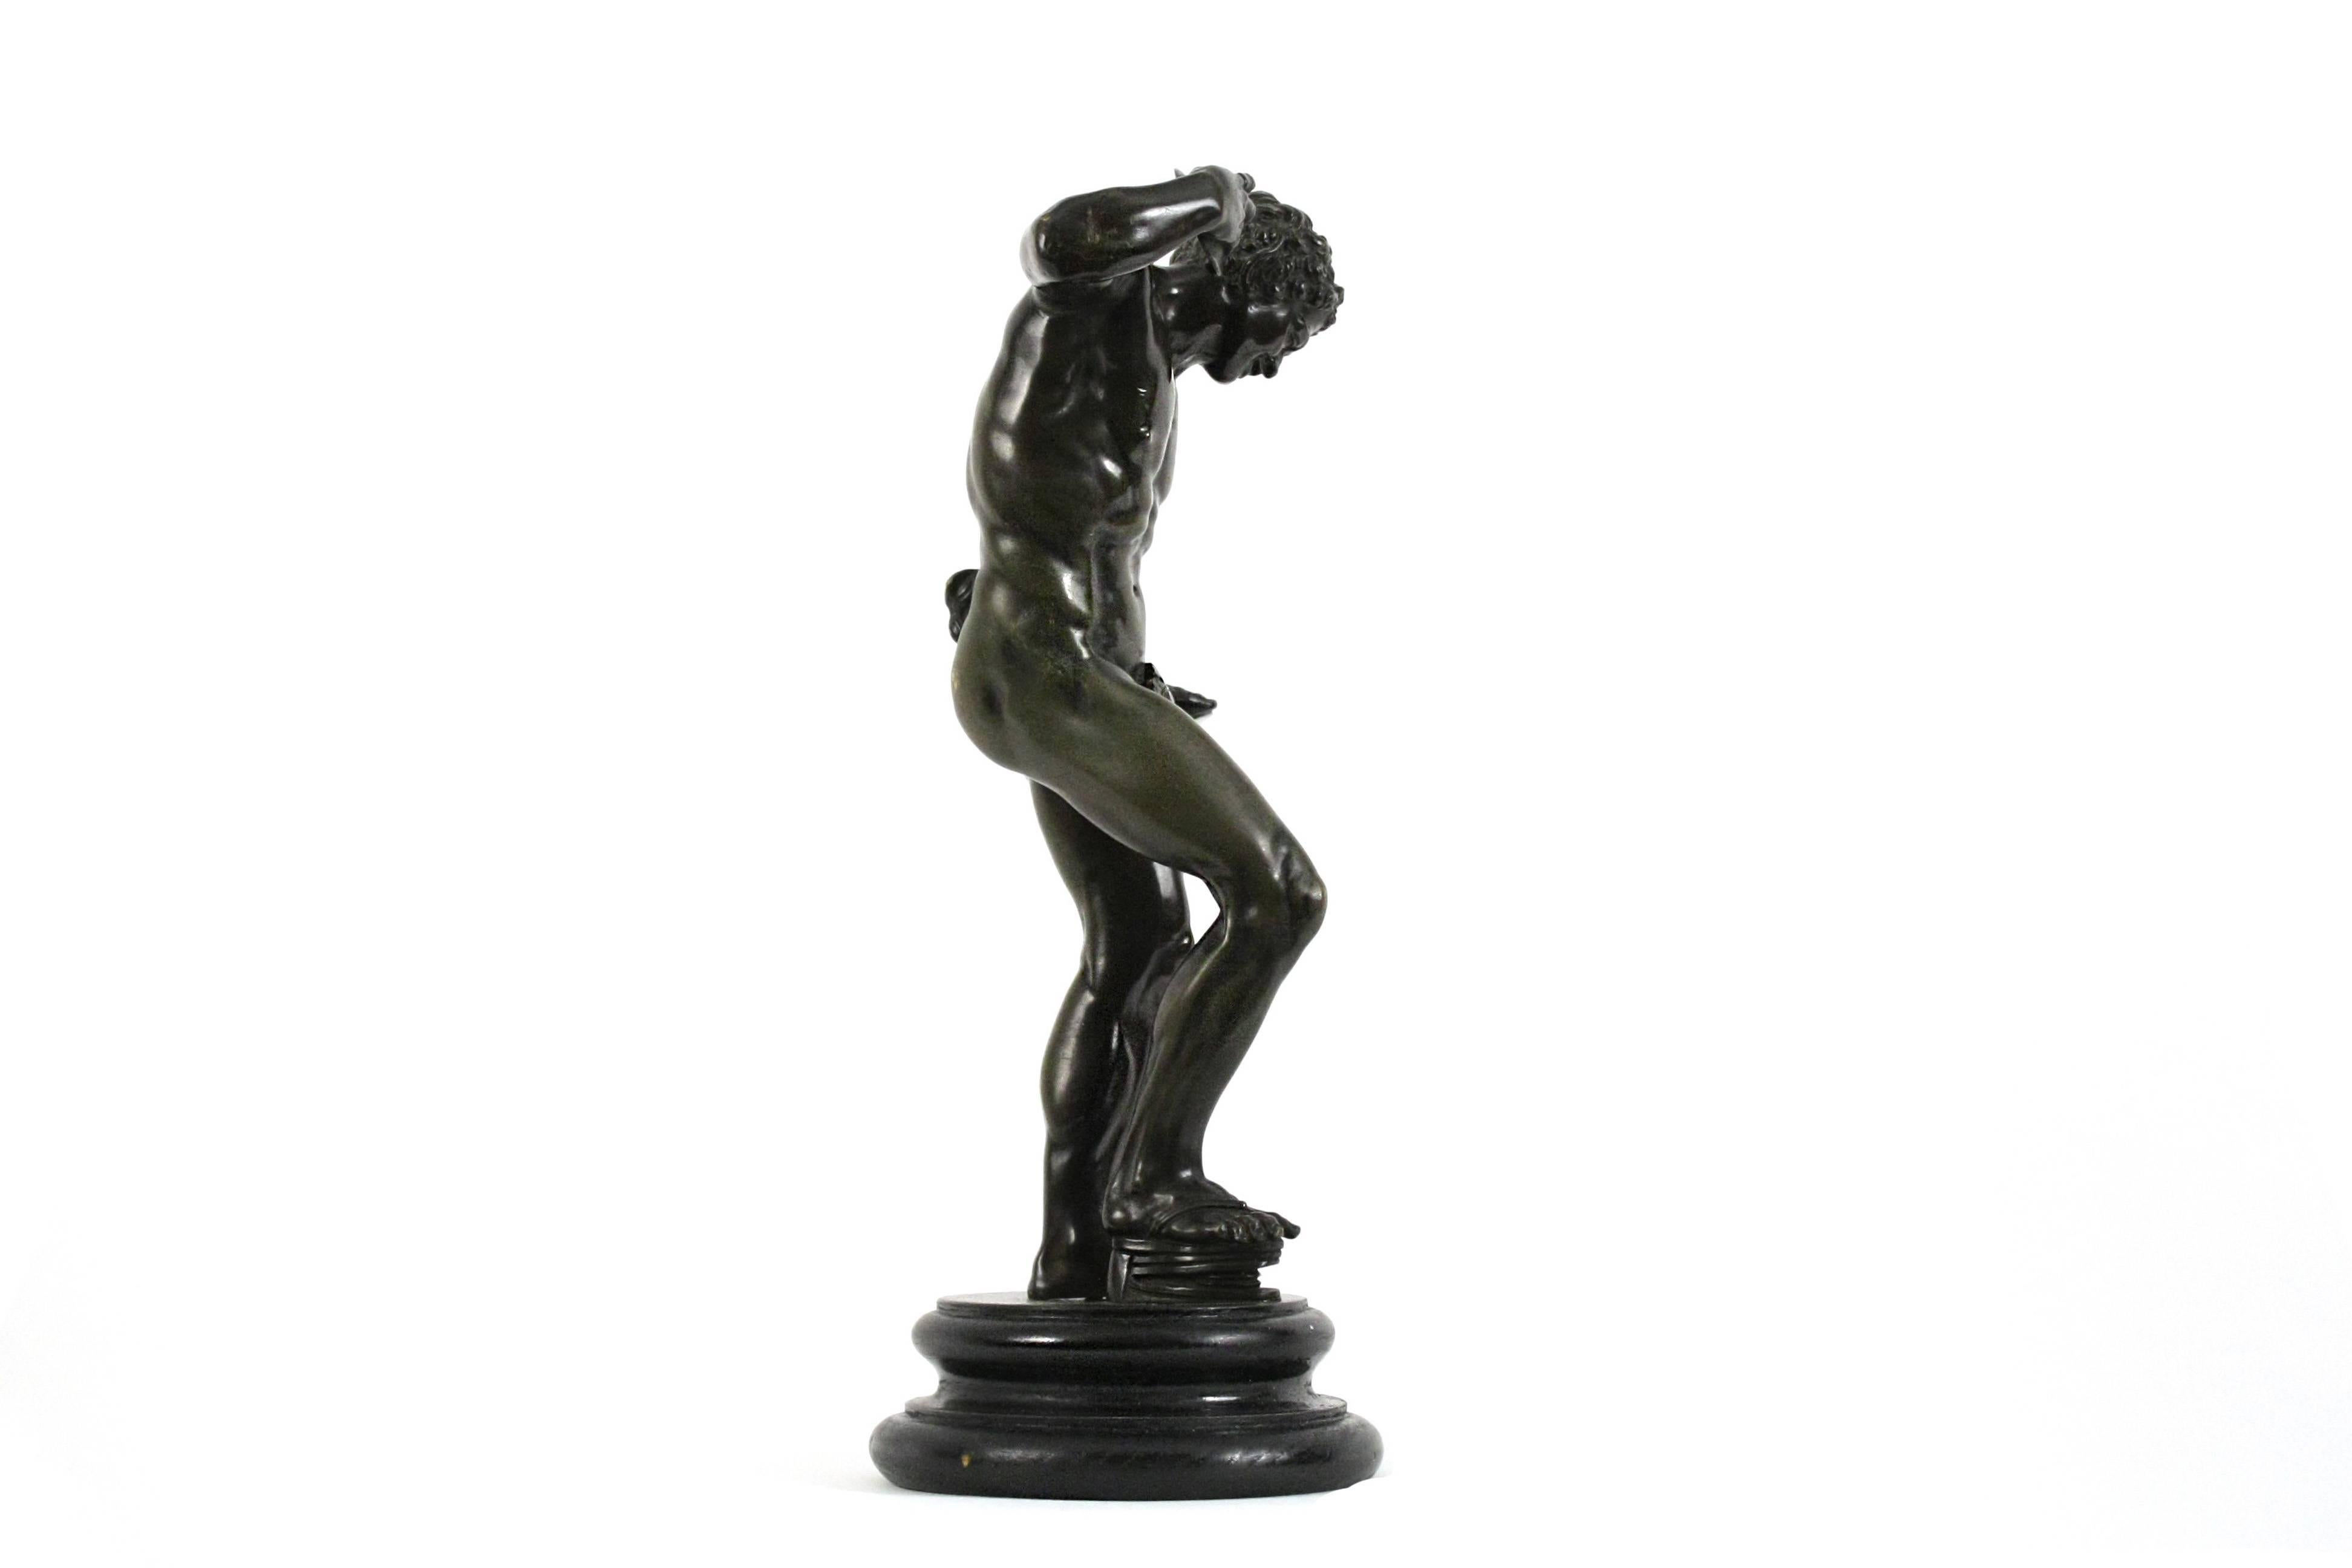 Bronze figure mounted on later wood base. This figure is based on the Hellenistic marble figure located in the Galleria degli Uffizi, Florence.

Italian, late 18th/early 19th century.
